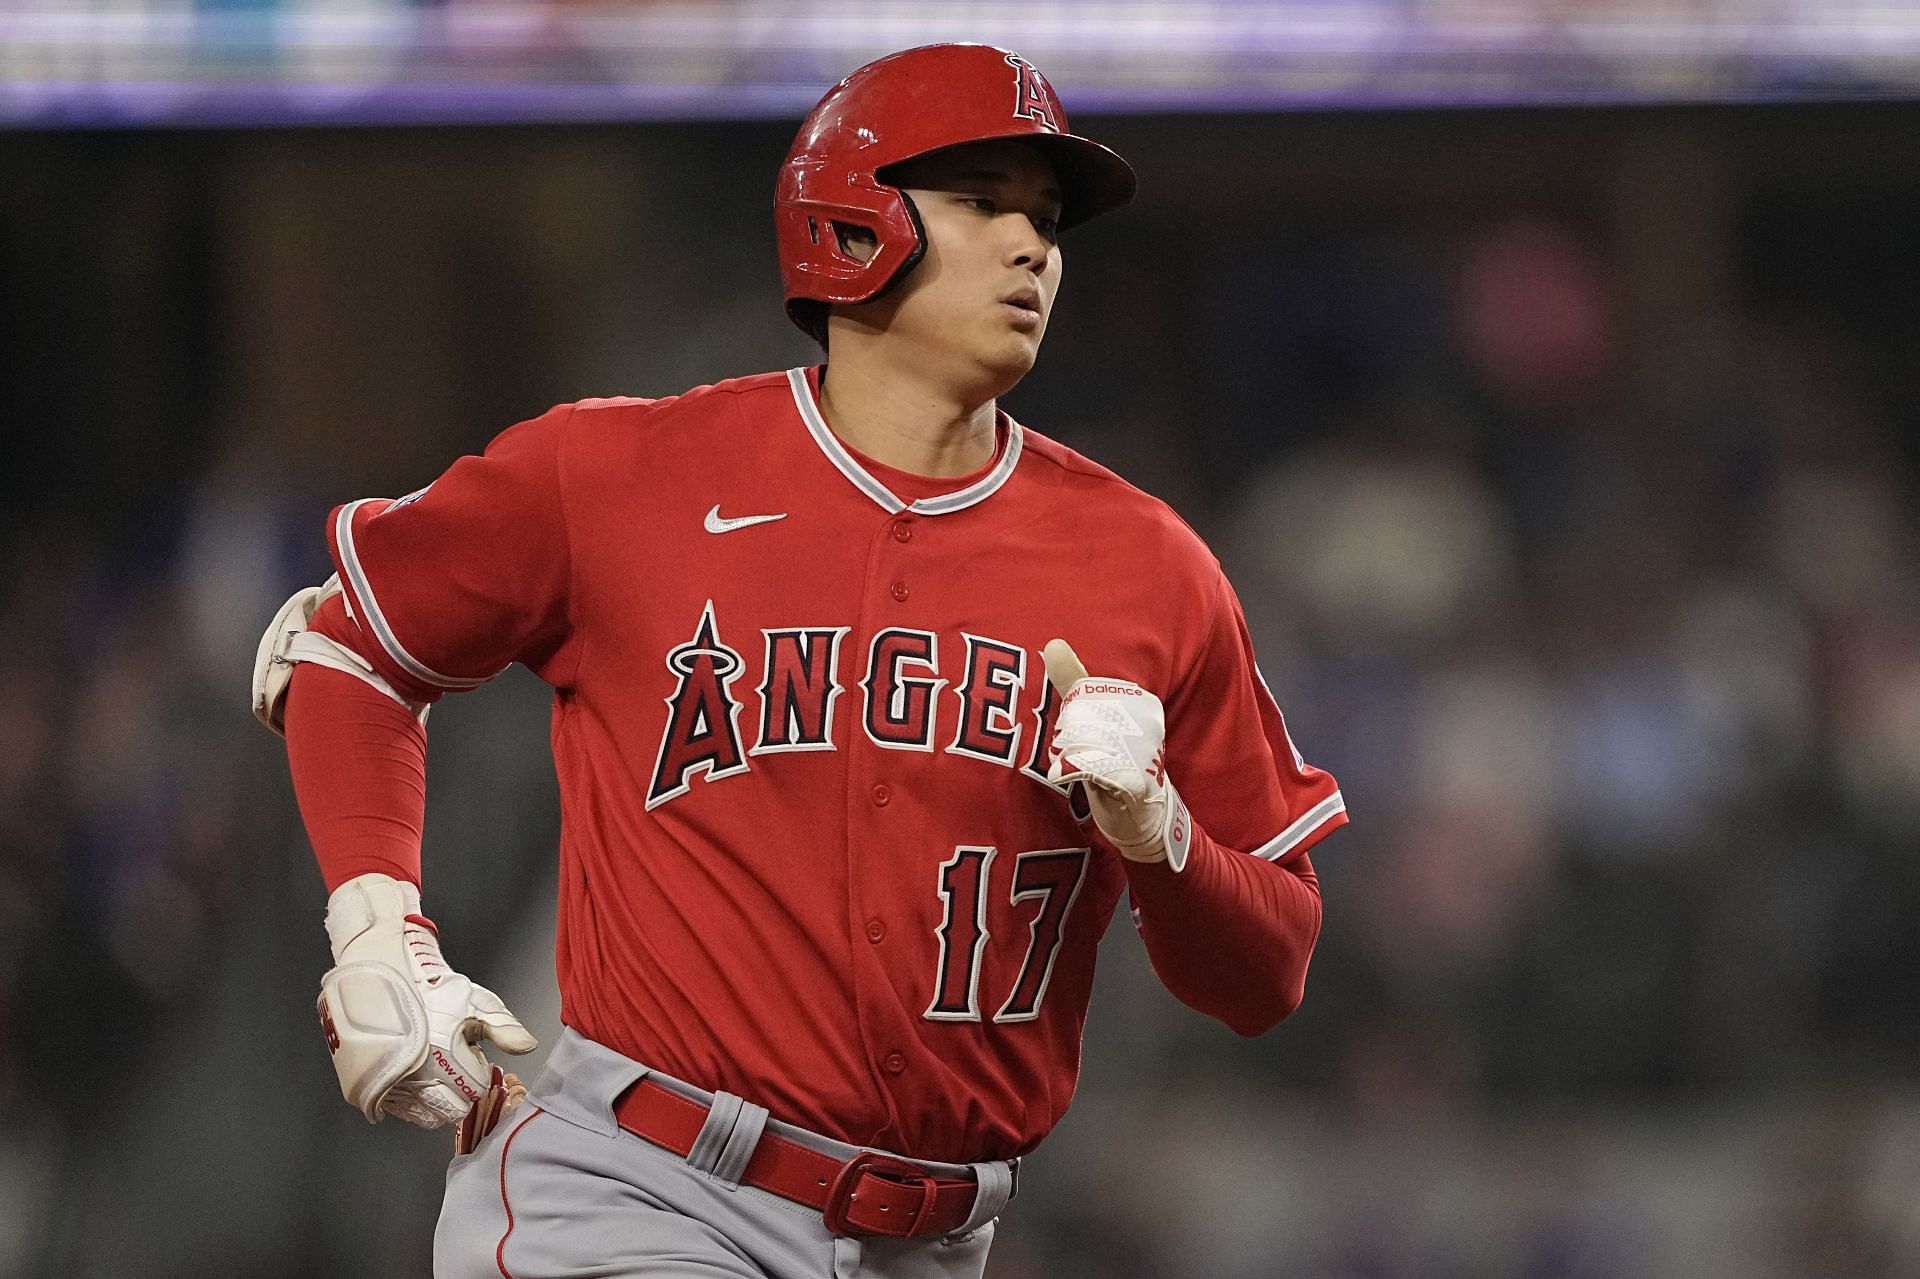 Shohei Ohtani runs the bases after hitting a two-run home run against the Texas Rangers at Globe Life Field